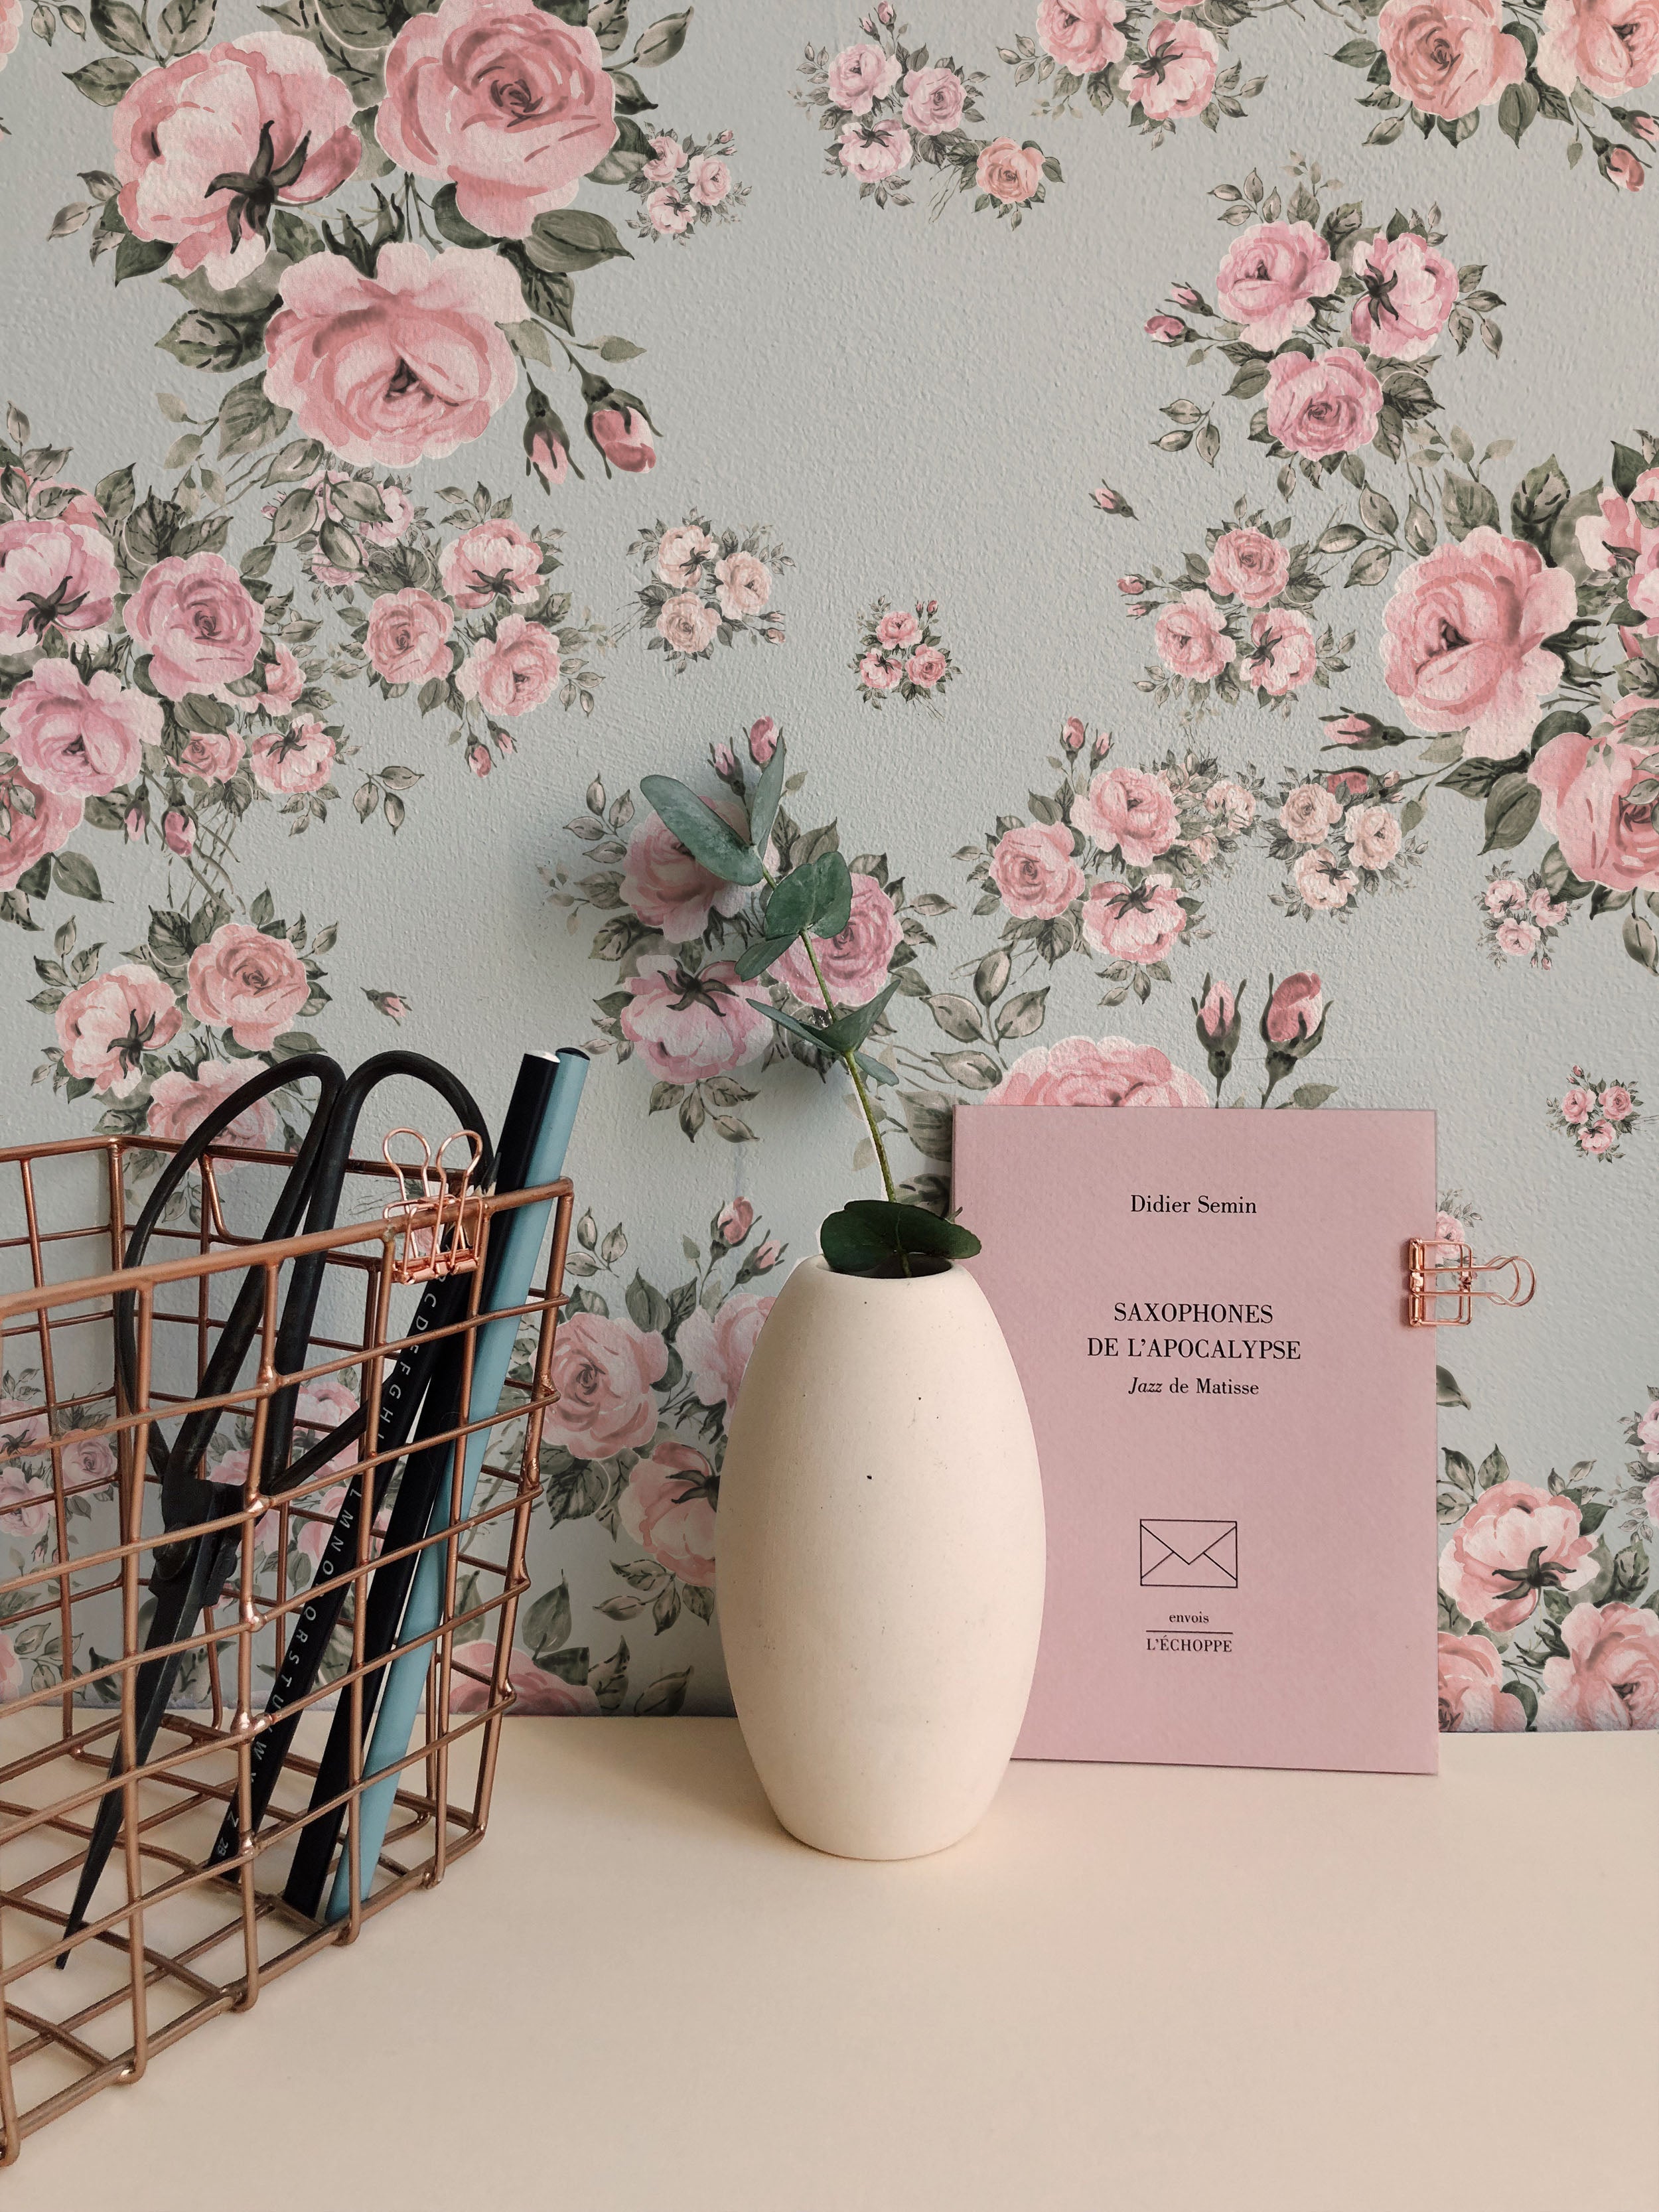 A close-up view of Rose Bouquet Wallpaper II featuring pink roses and green leaves on a light blue background. The setting includes a white vase, books, and a wire basket on a desk.